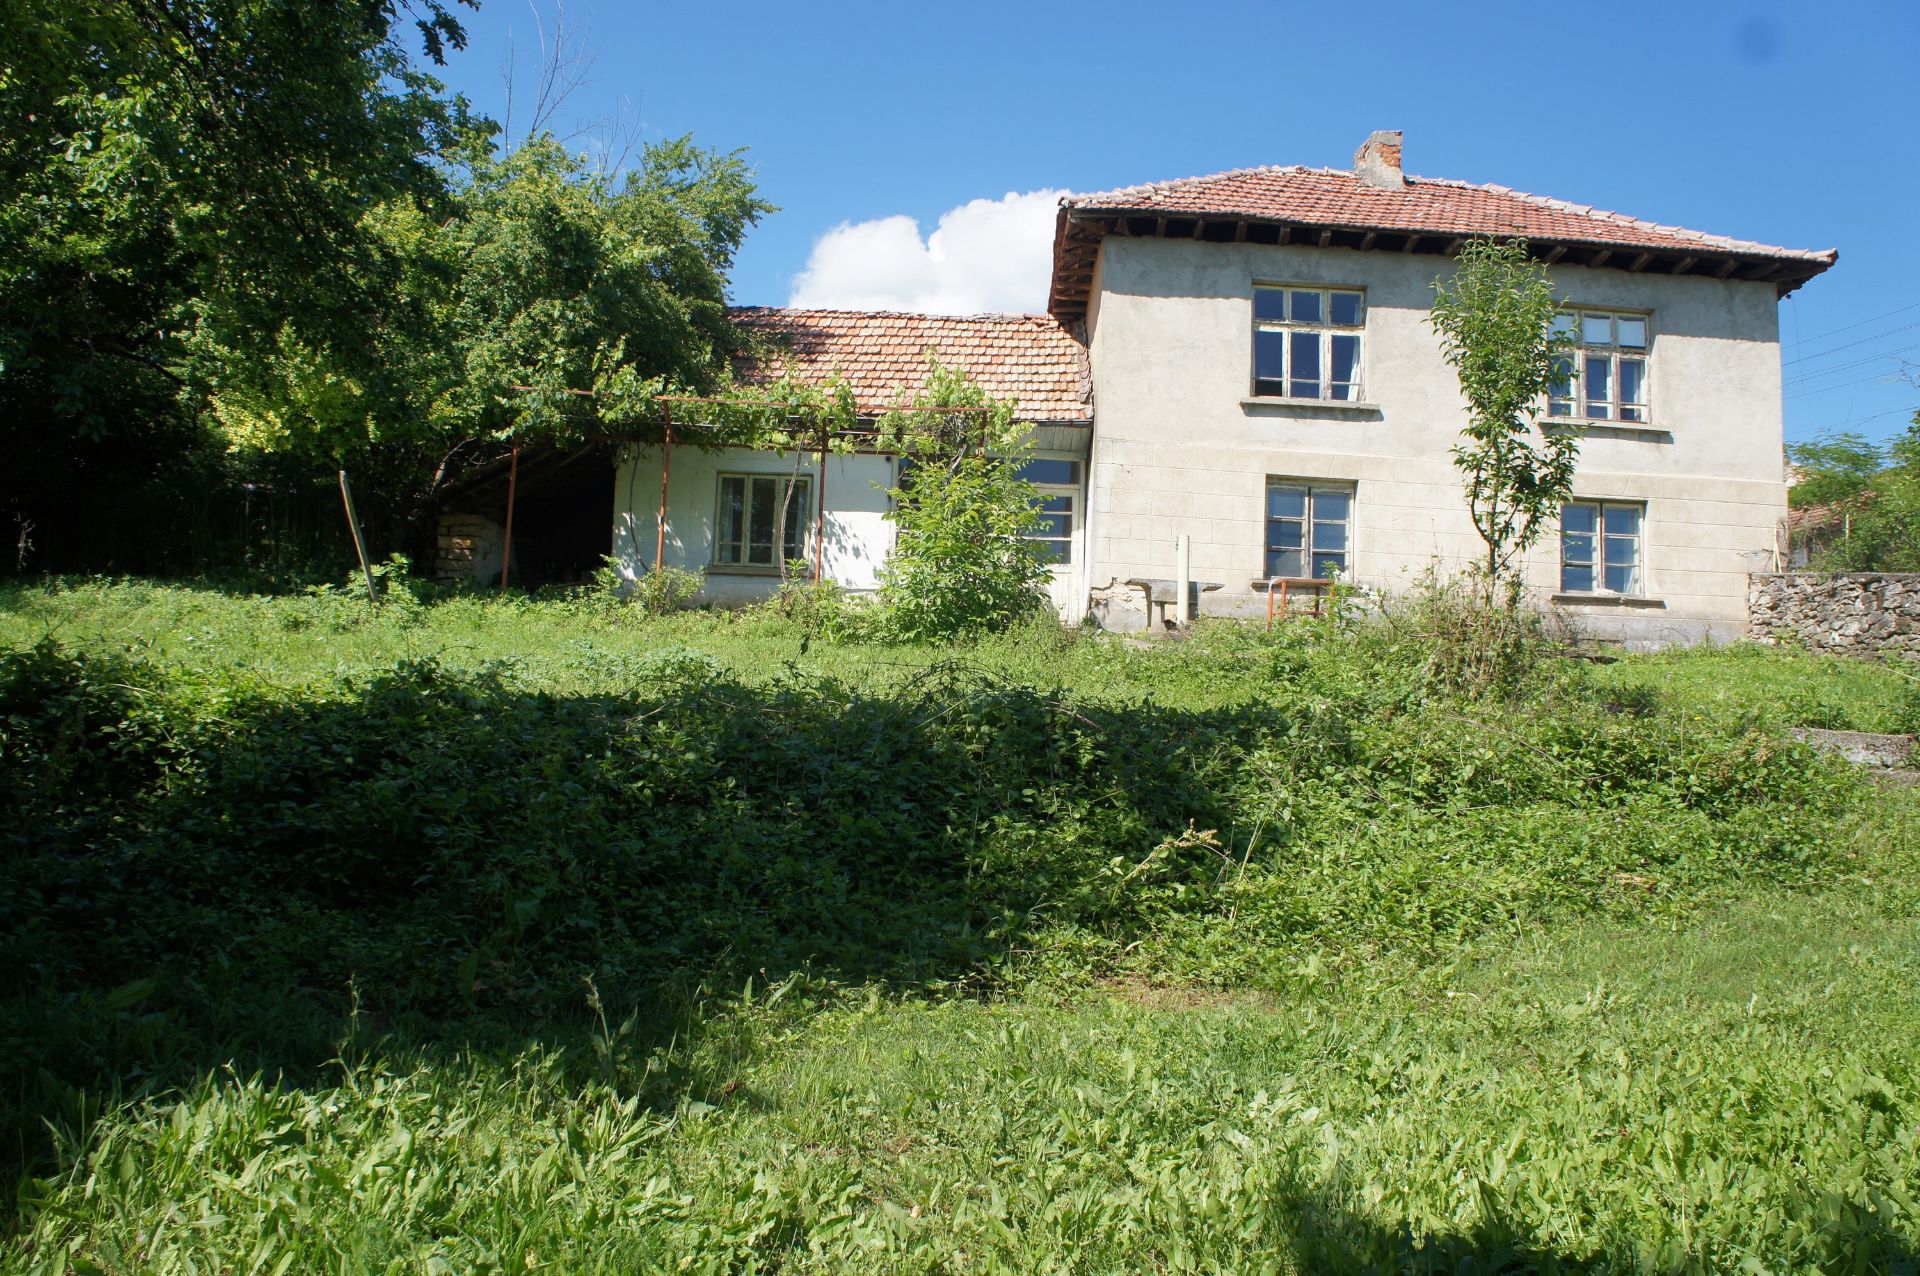 Huge freehold home and land in Bulgaria - near to Alexander Stambolisky dam and Waterfalls! - Image 3 of 74